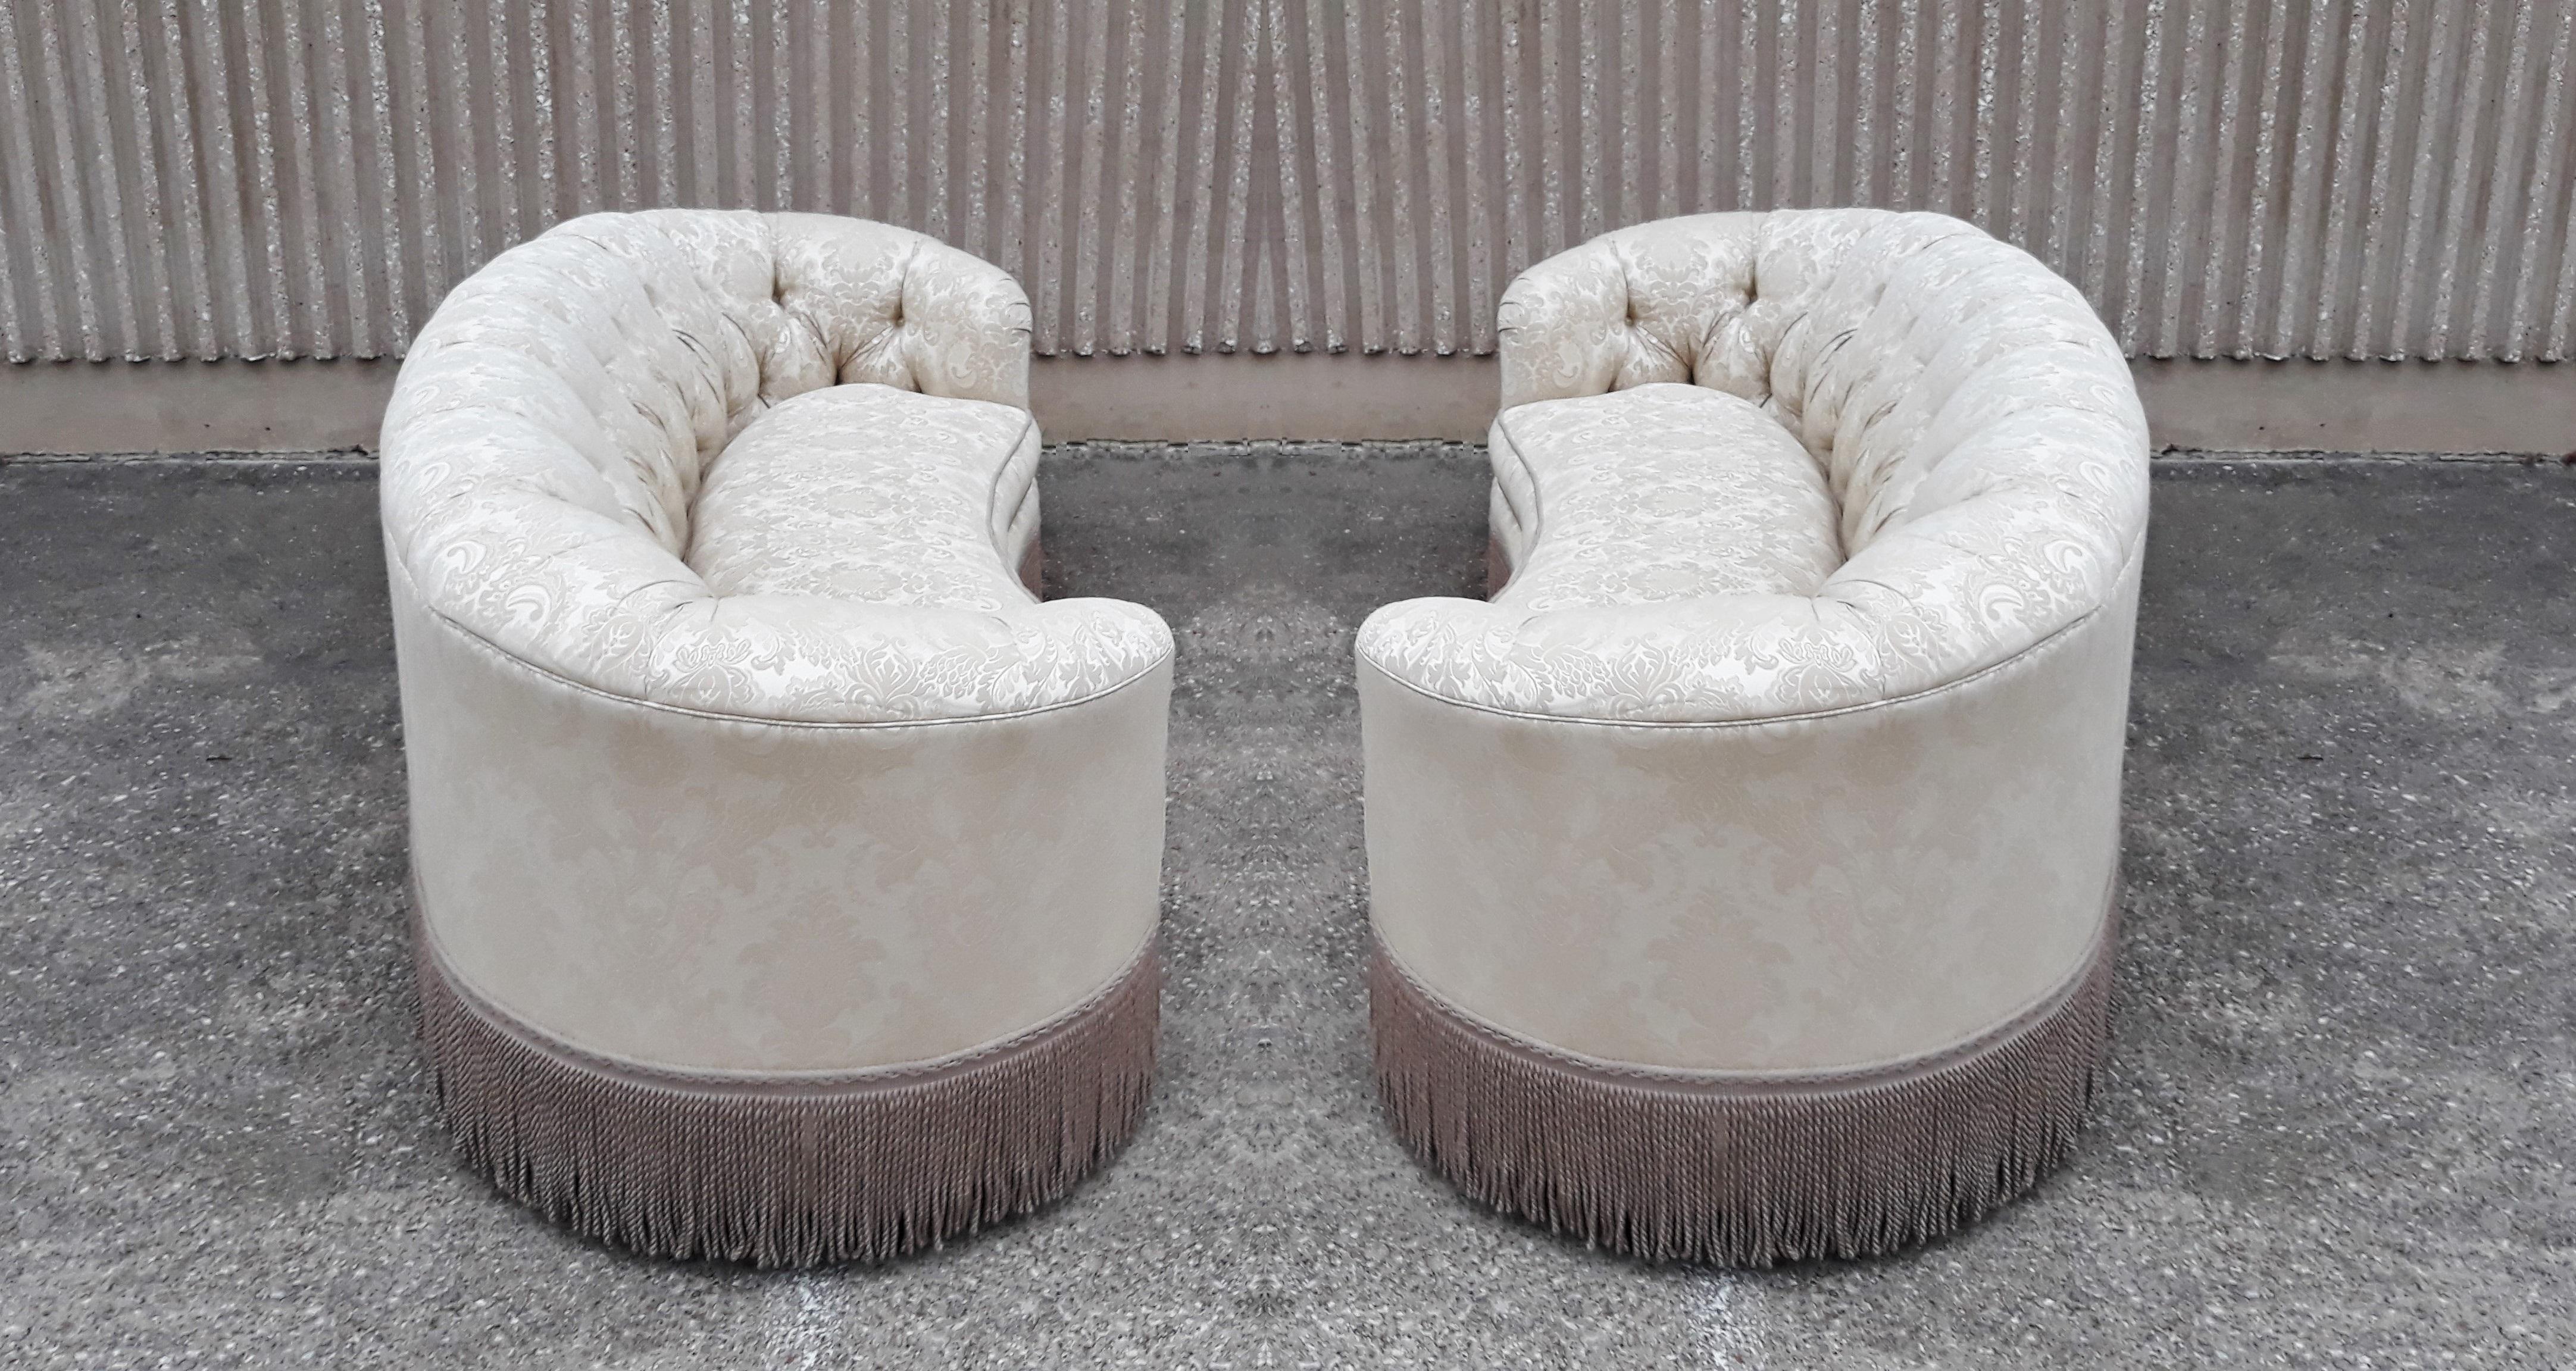 20th Century Pair of Classic Kidney Bean Shaped Sofas